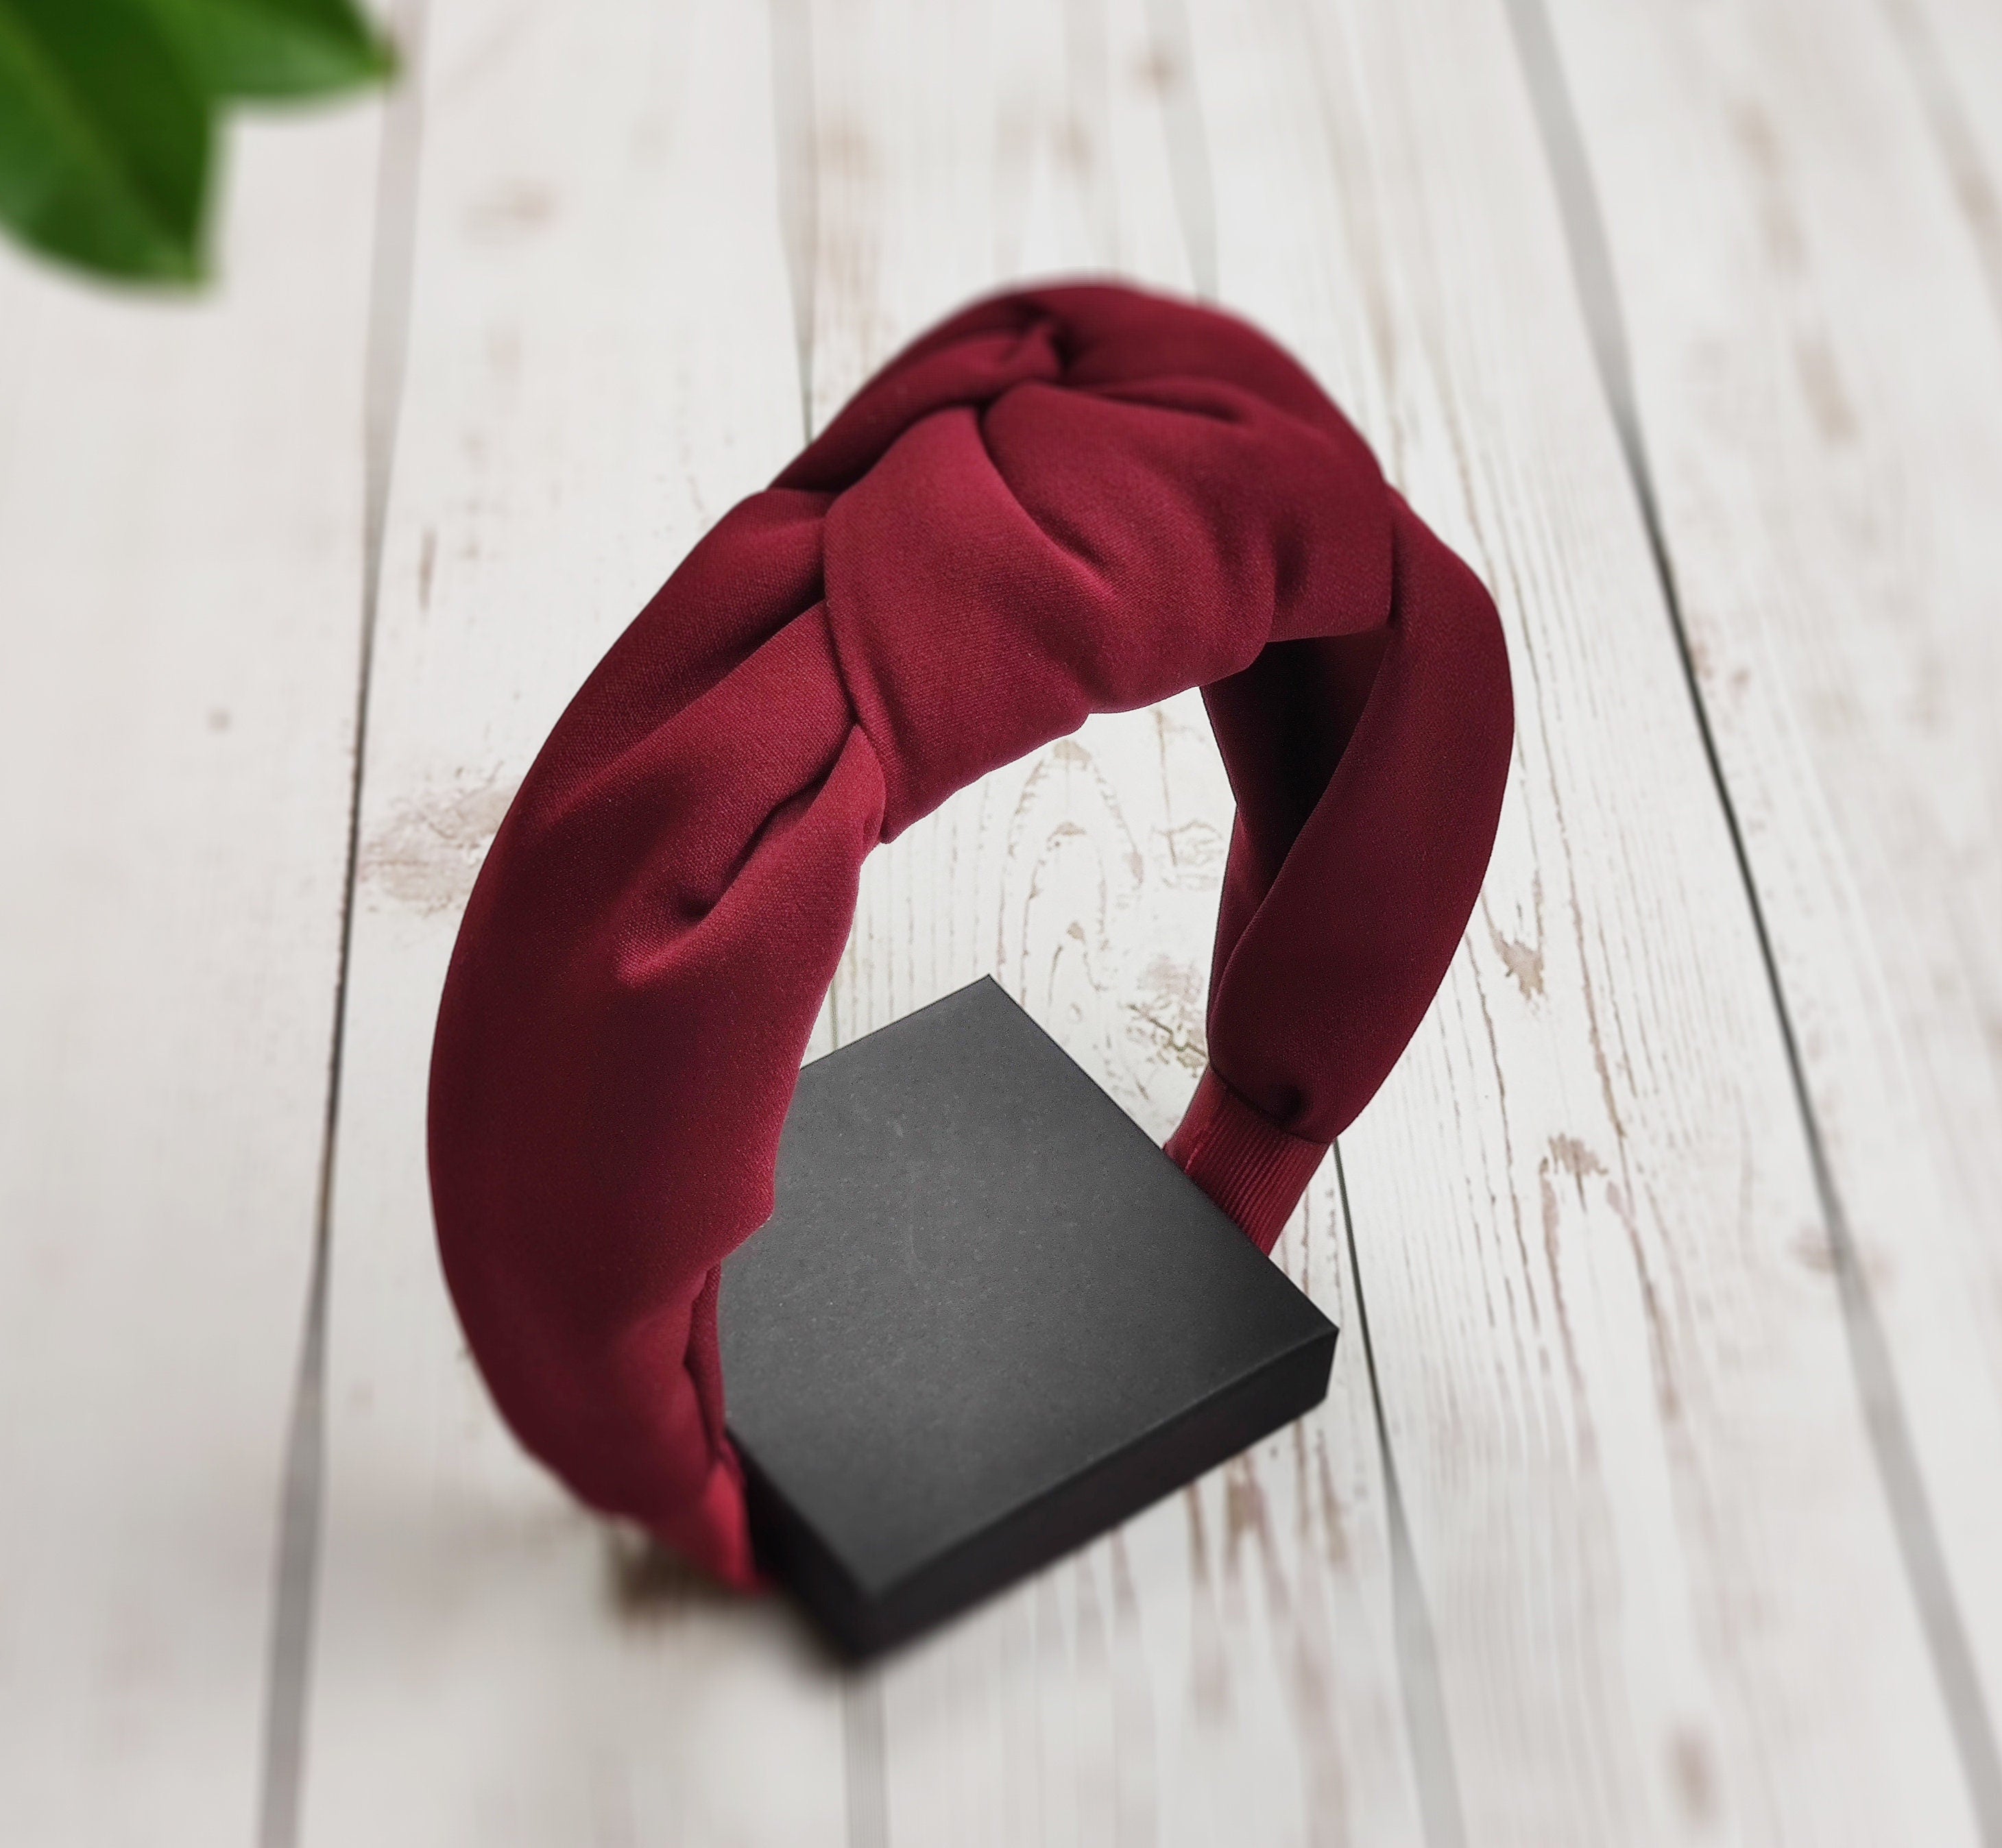 Make a statement with this stylish and trendy Alice band headband in dark red color. Made from high-quality materials, this headband is versatile and perfect for a night out on the town.